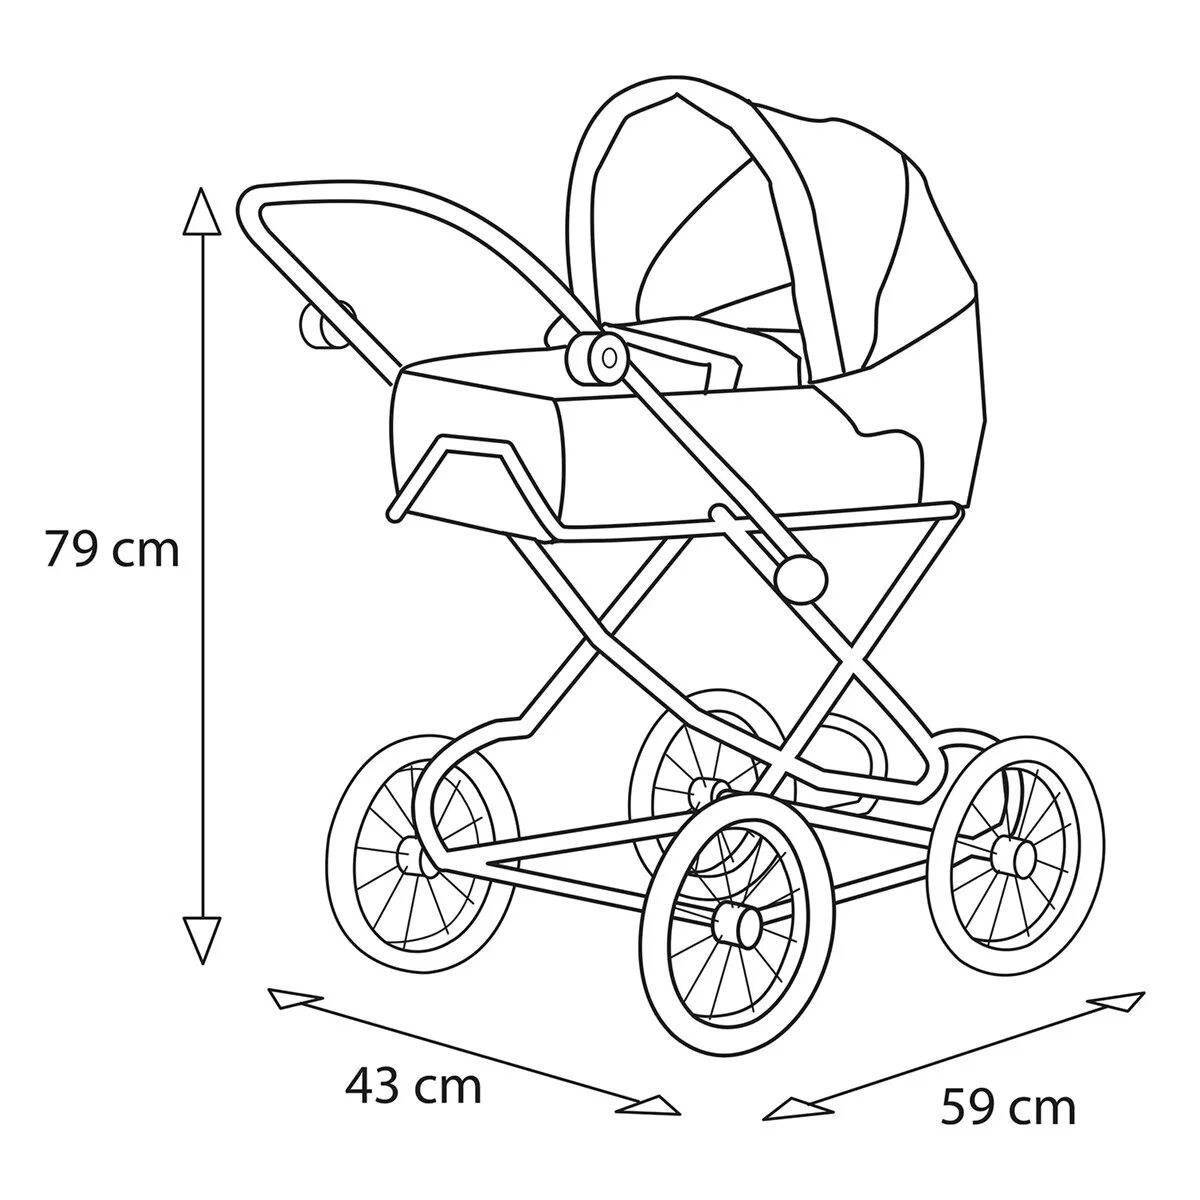 Coloring page whimsical baby stroller